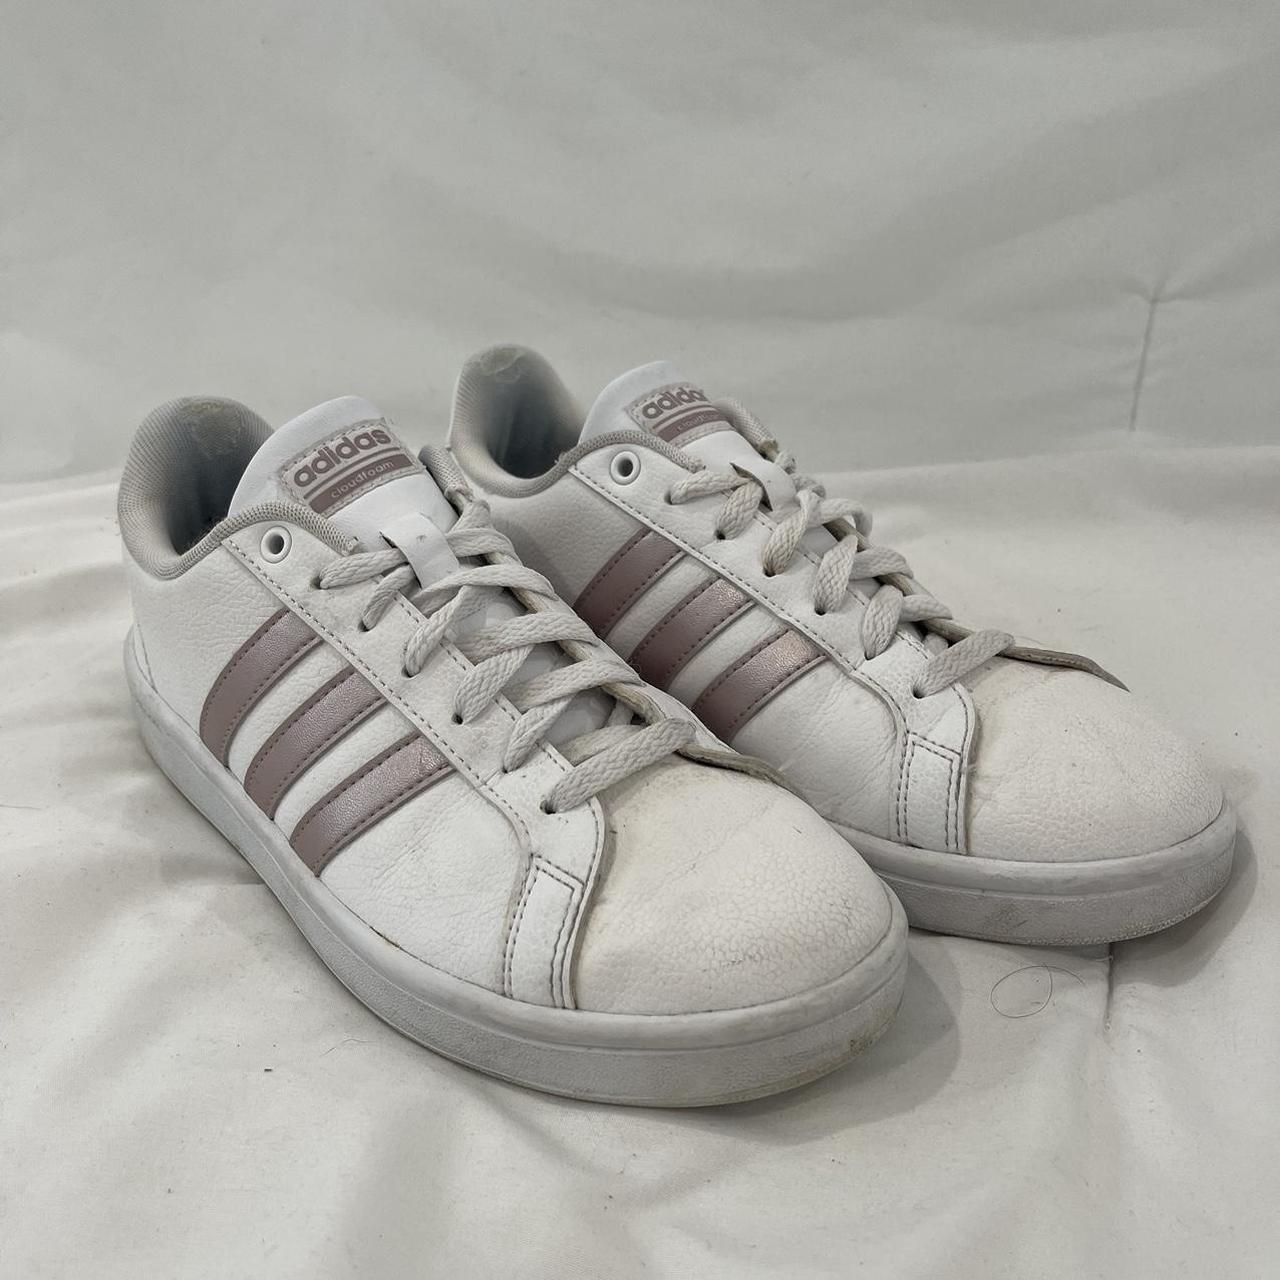 ADIDAS GRAND COURT SNEAKER rose gold and white,... - Depop